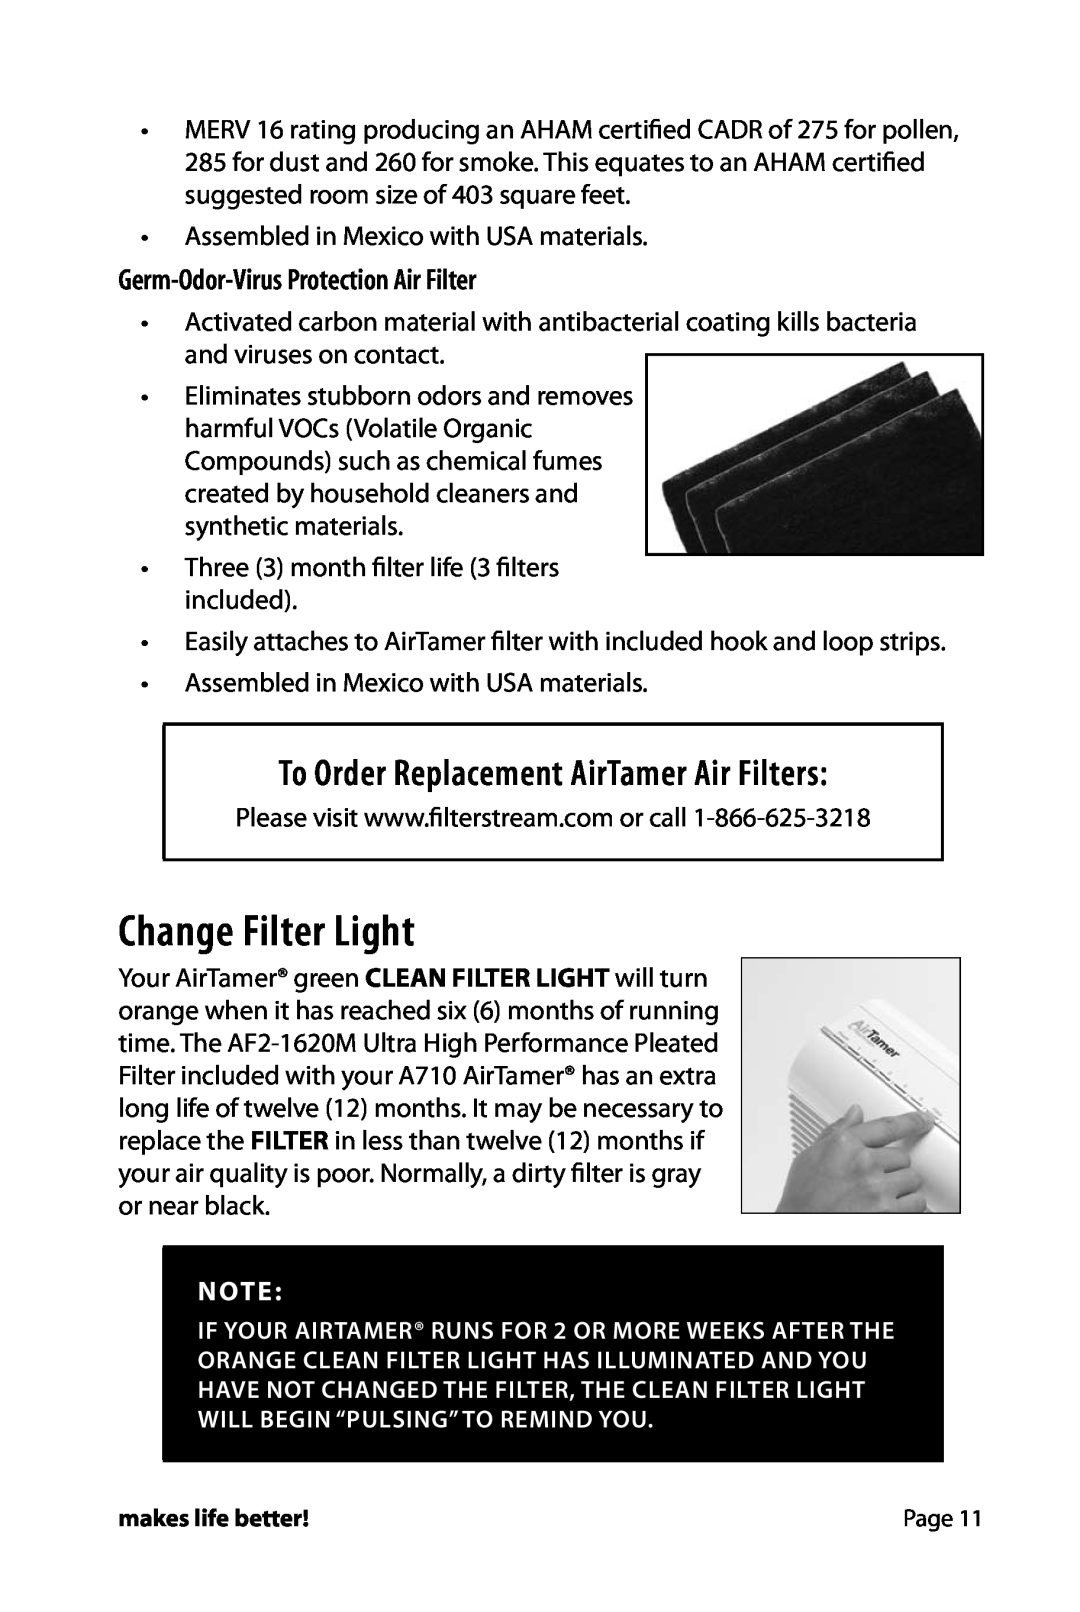 FilterStream HW_A710 Change Filter Light, Germ-Odor-VirusProtection Air Filter, To Order Replacement AirTamer Air Filters 